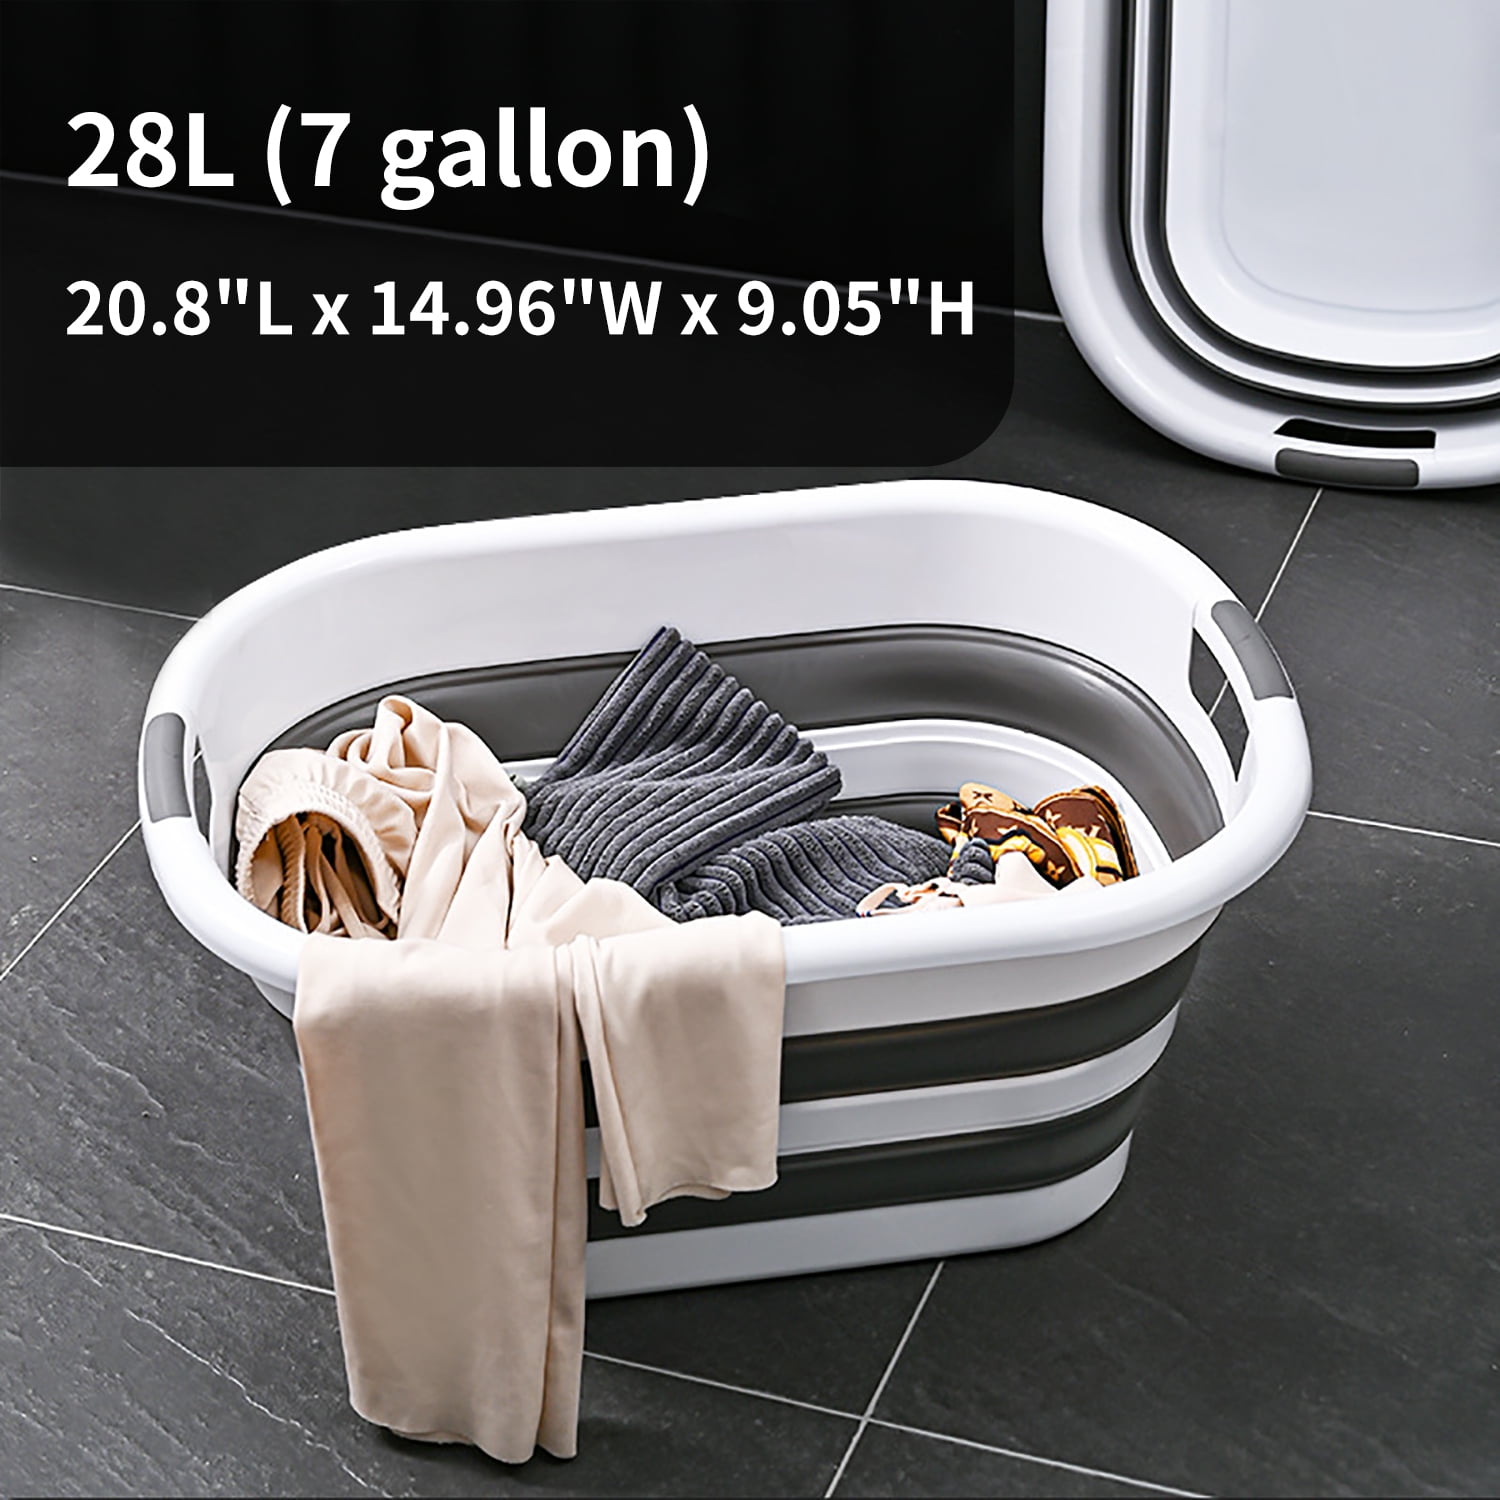 SILICONE COLLAPSIBLE LAUNDRY BASKET FOLDING CLOTH WASHING POP UP STORAGE  BIN 22L